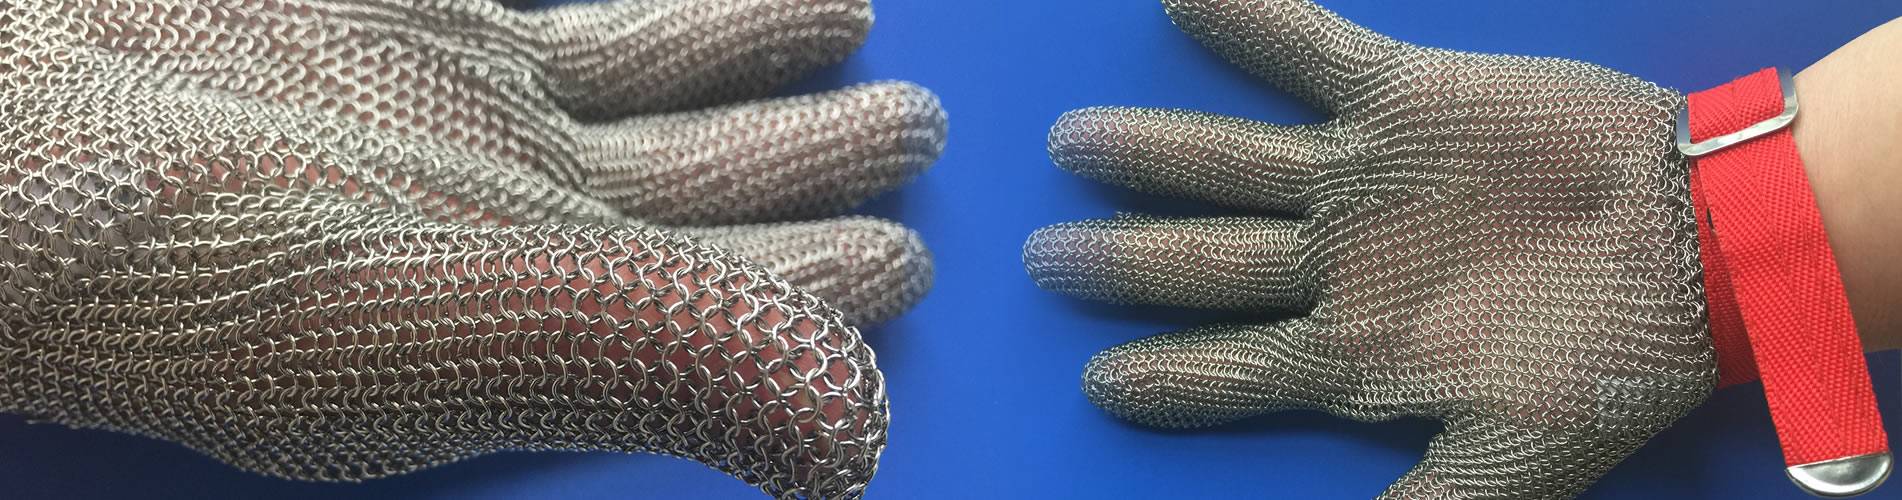 Two hands are wearing chainmail gloves with palms facing up.